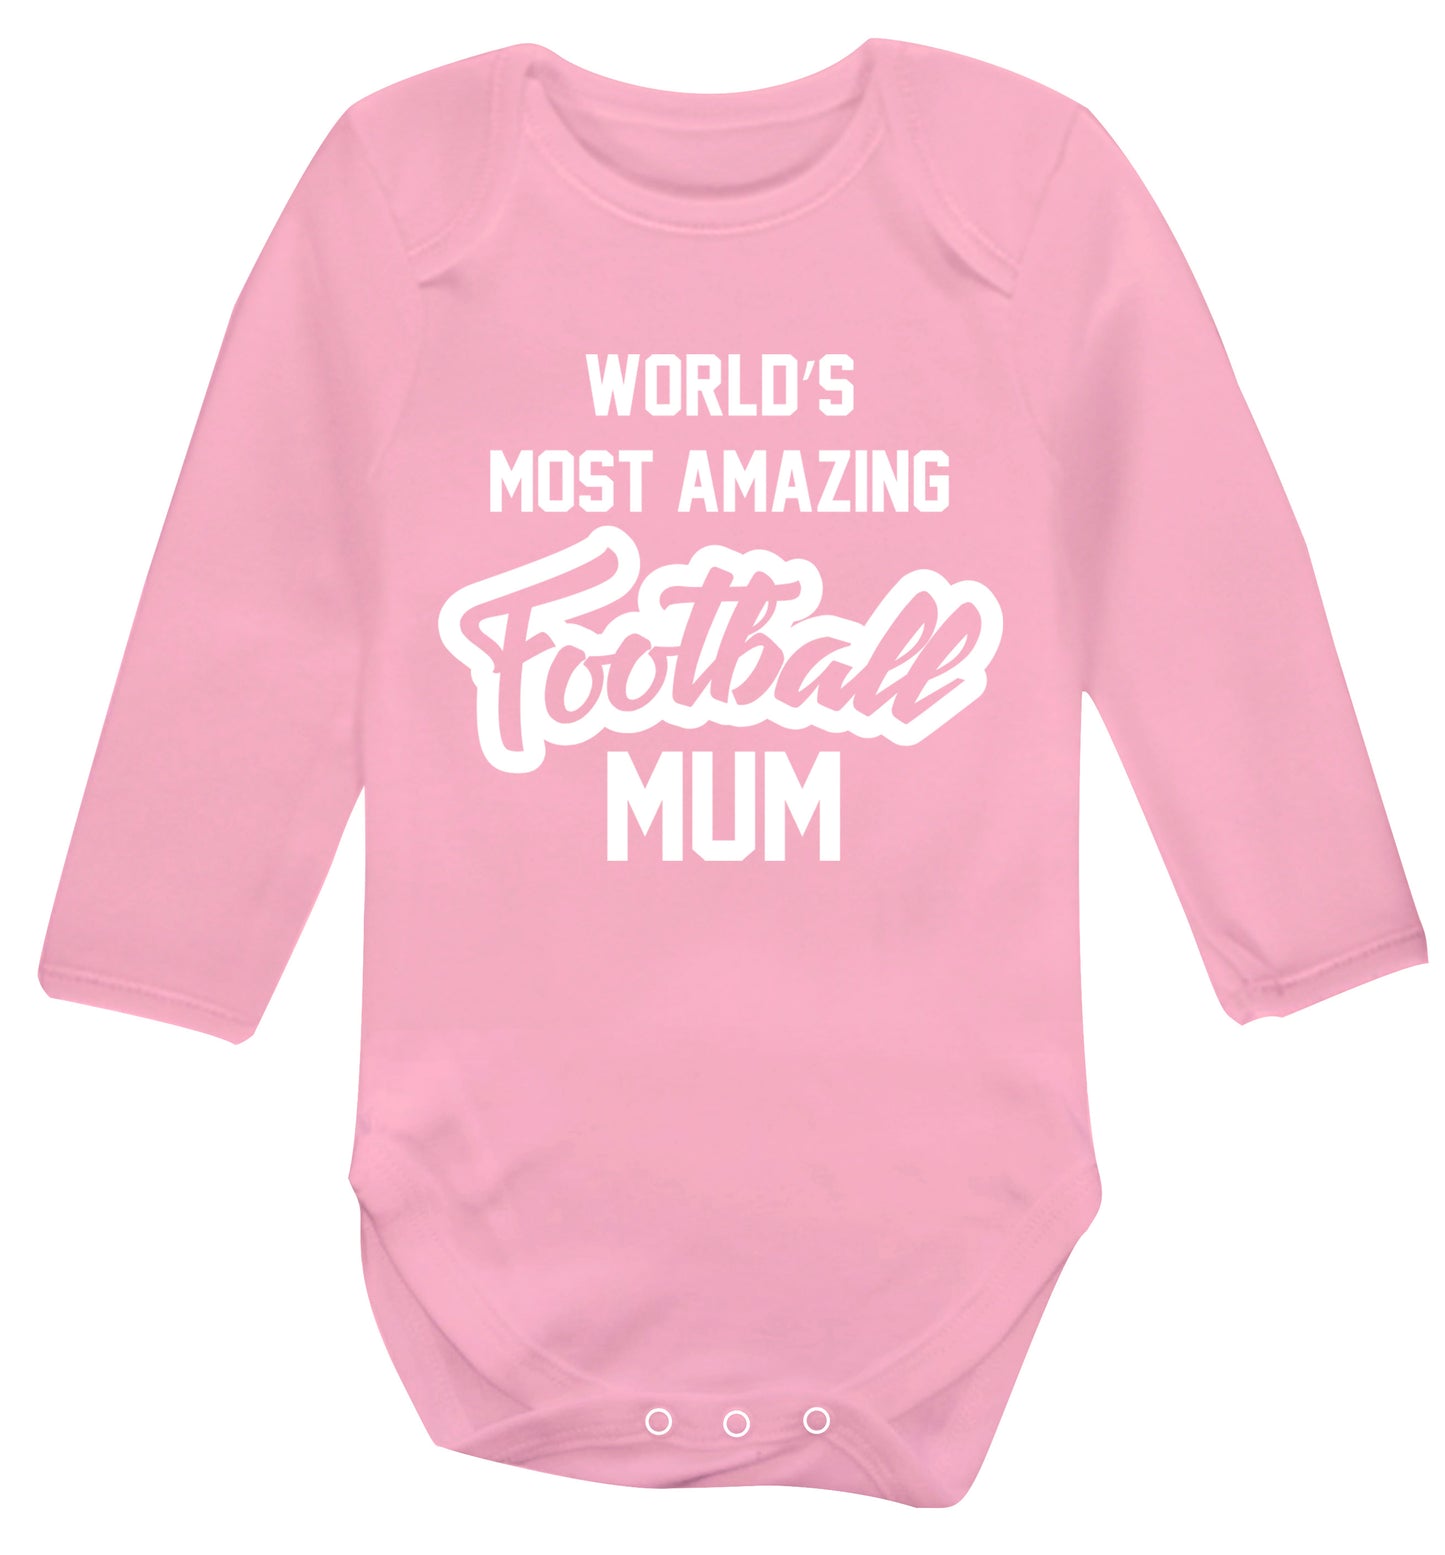 Worlds most amazing football mum Baby Vest long sleeved pale pink 6-12 months